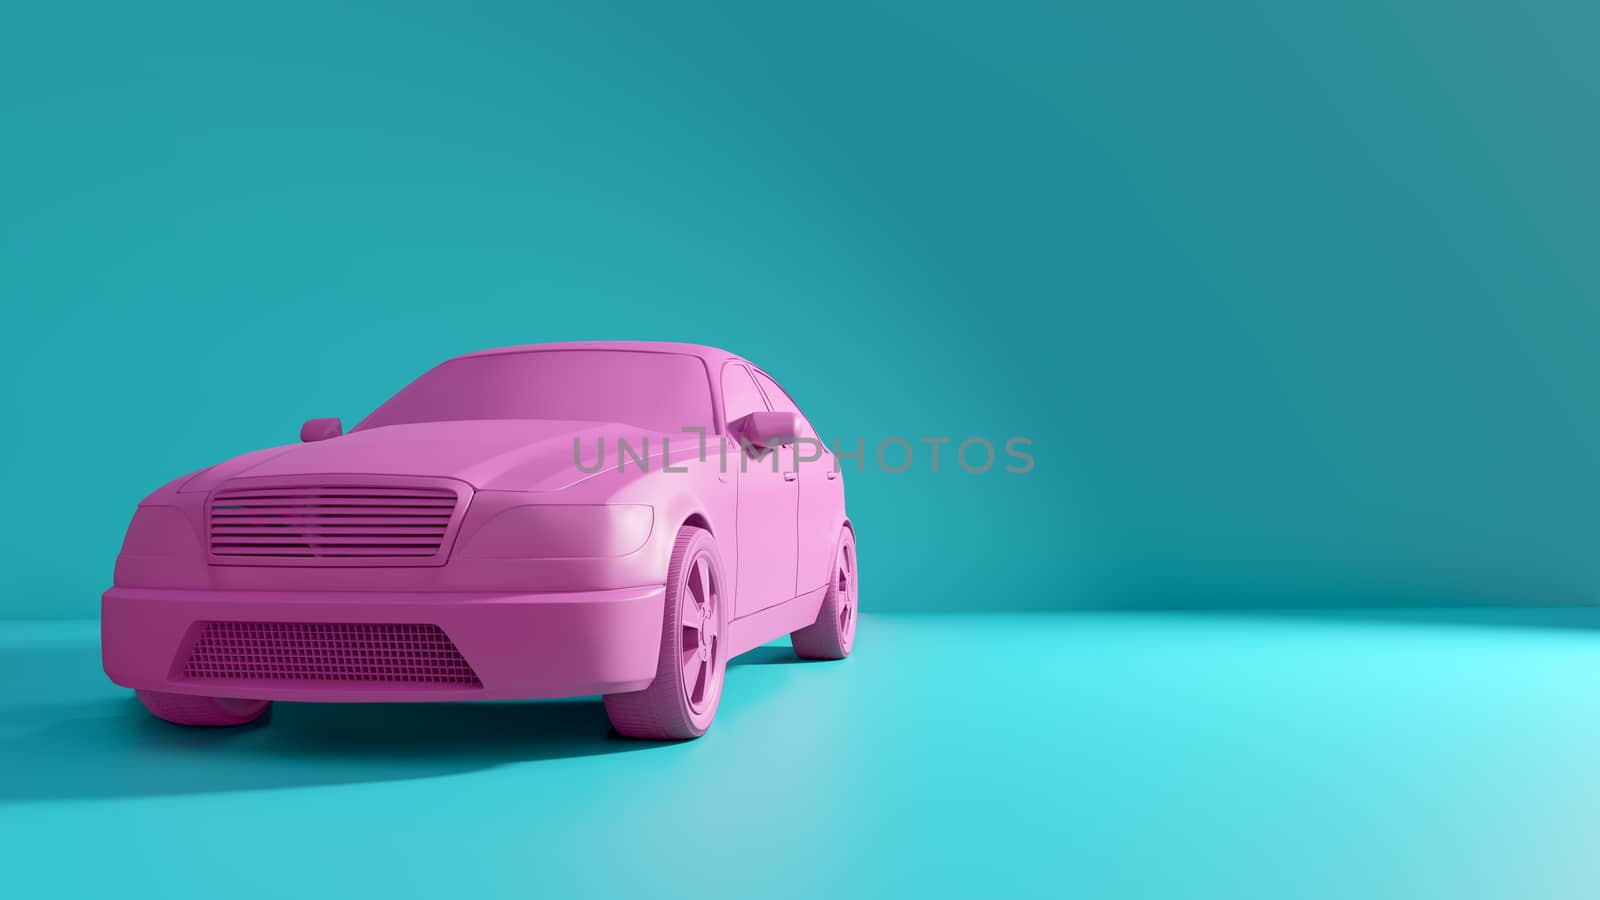 Styled 3D illustration of the pink car by cherezoff